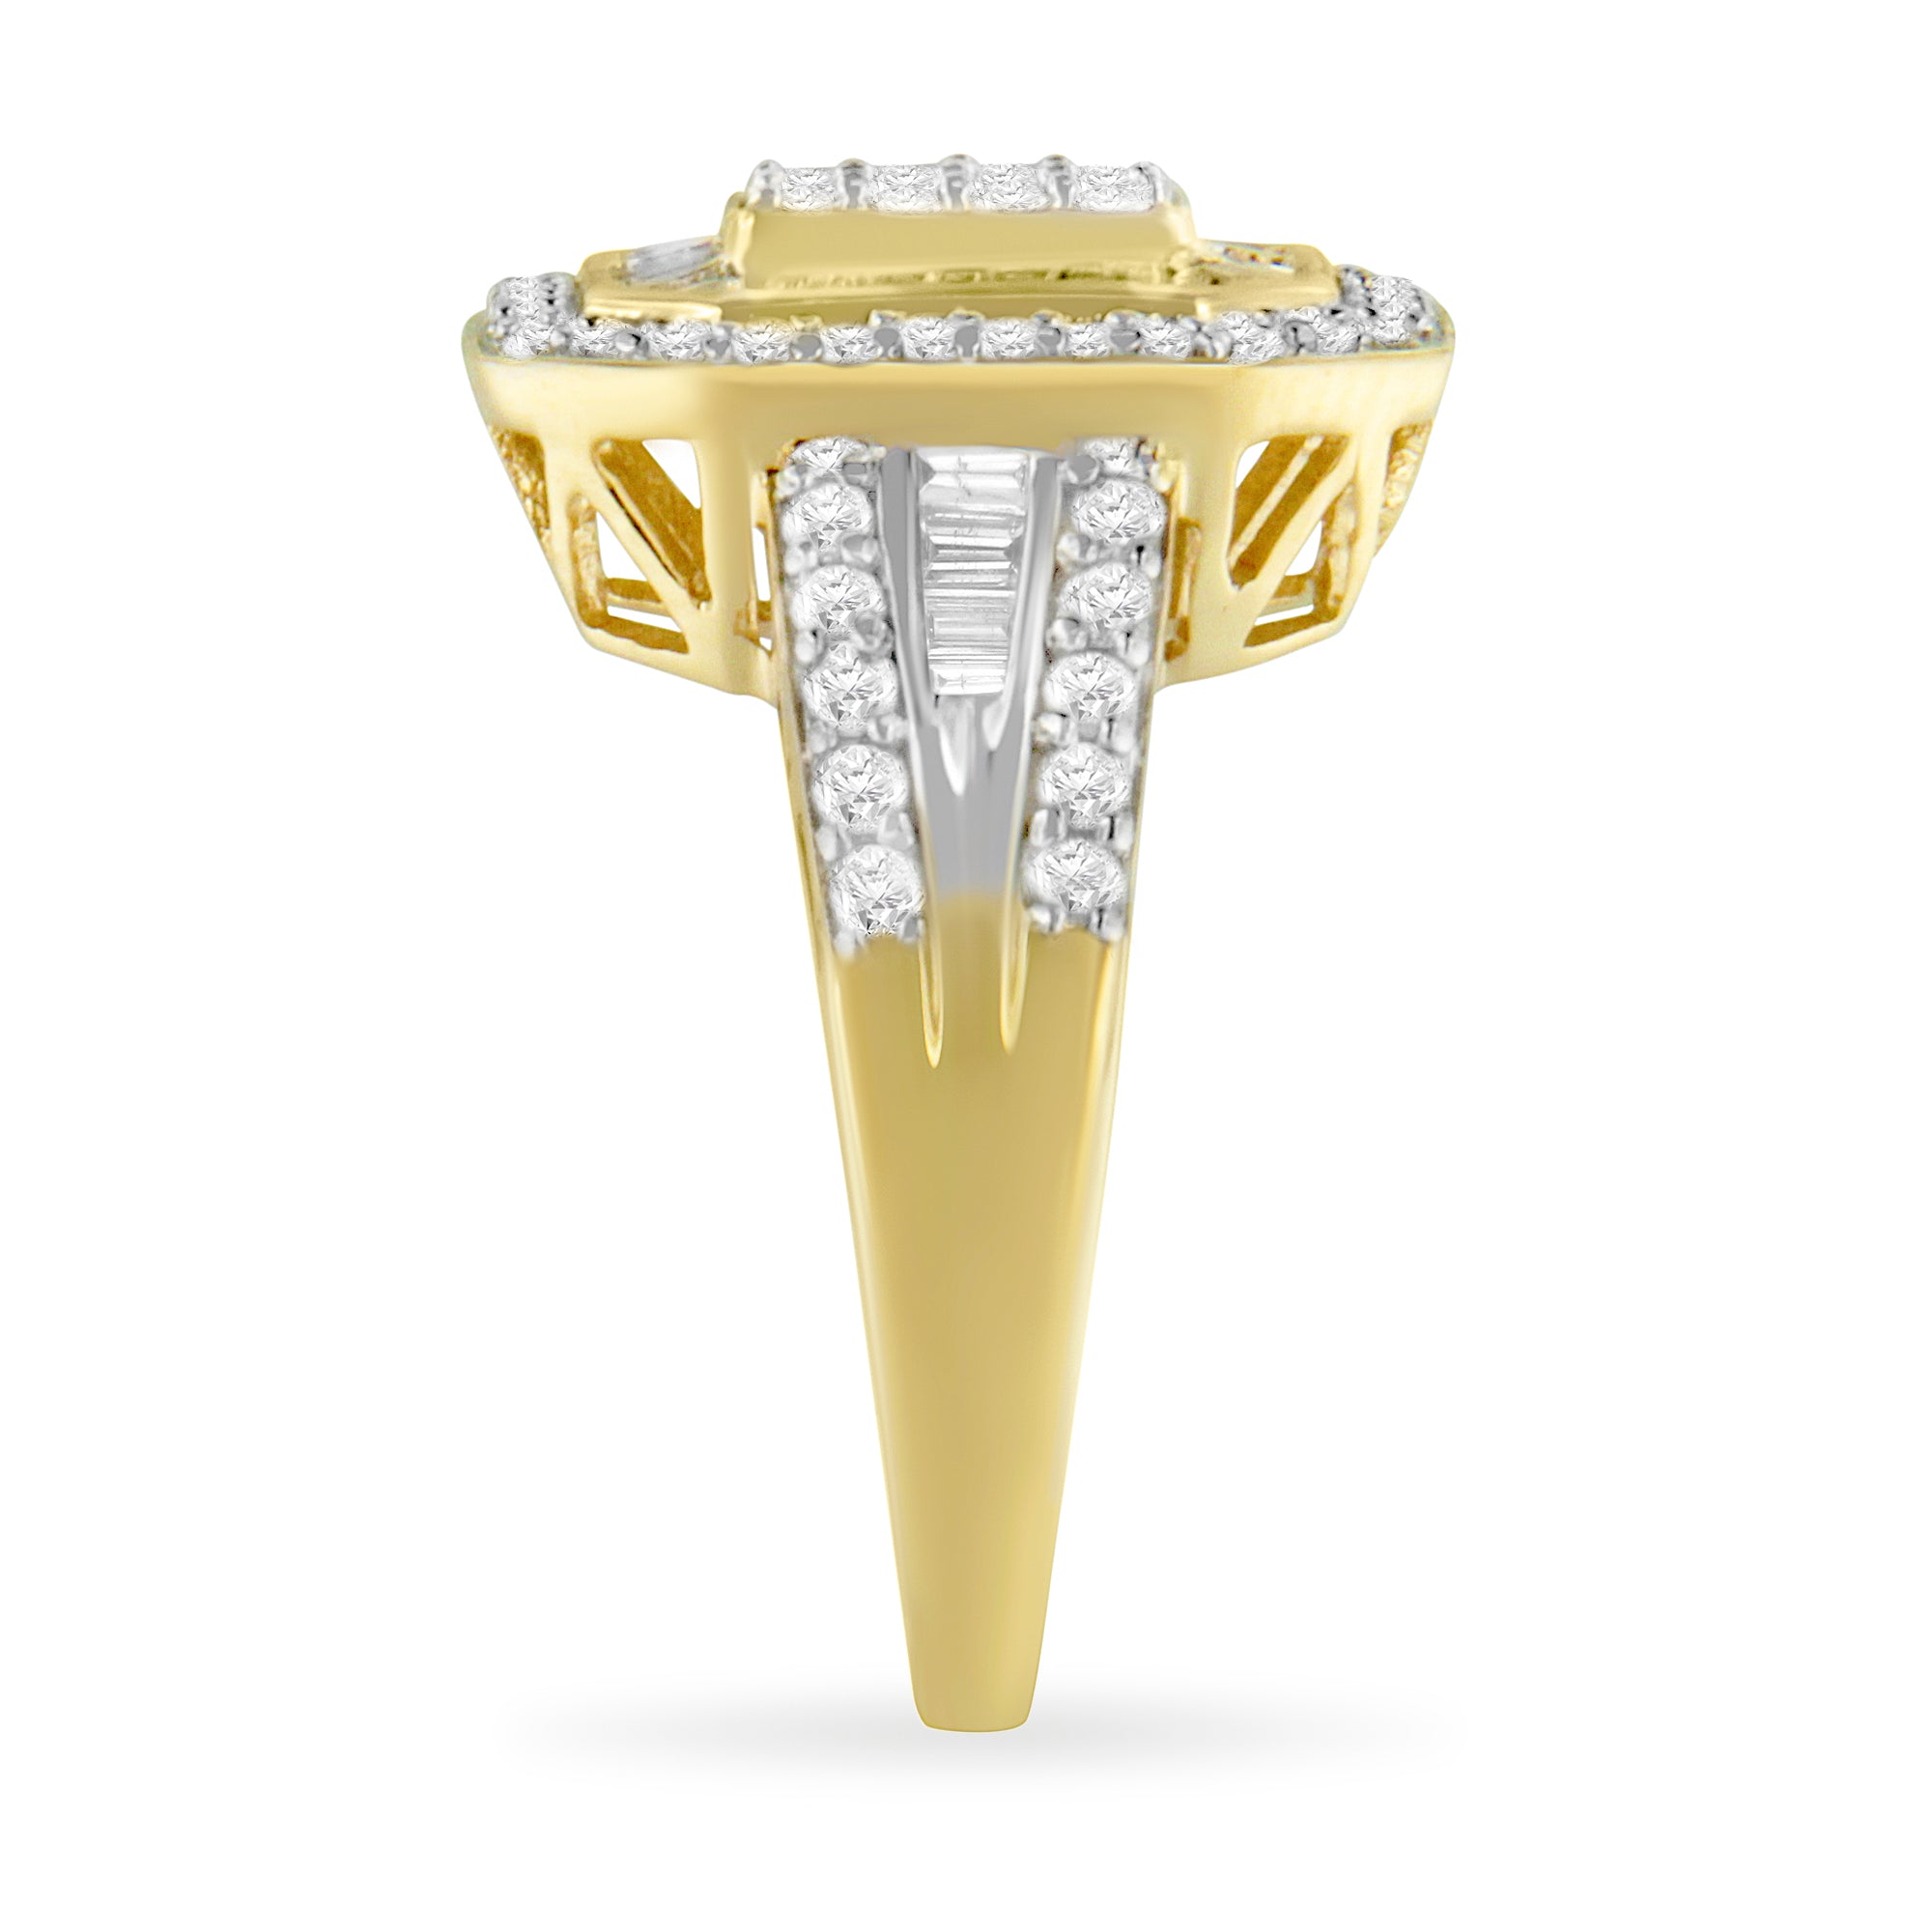 10K Yellow Gold 1.0 Cttw Diamond Vintage Inspired Baguette-Cut Double Halo Emerald-Shaped Frame Cocktail Ring  Size 6-1/2